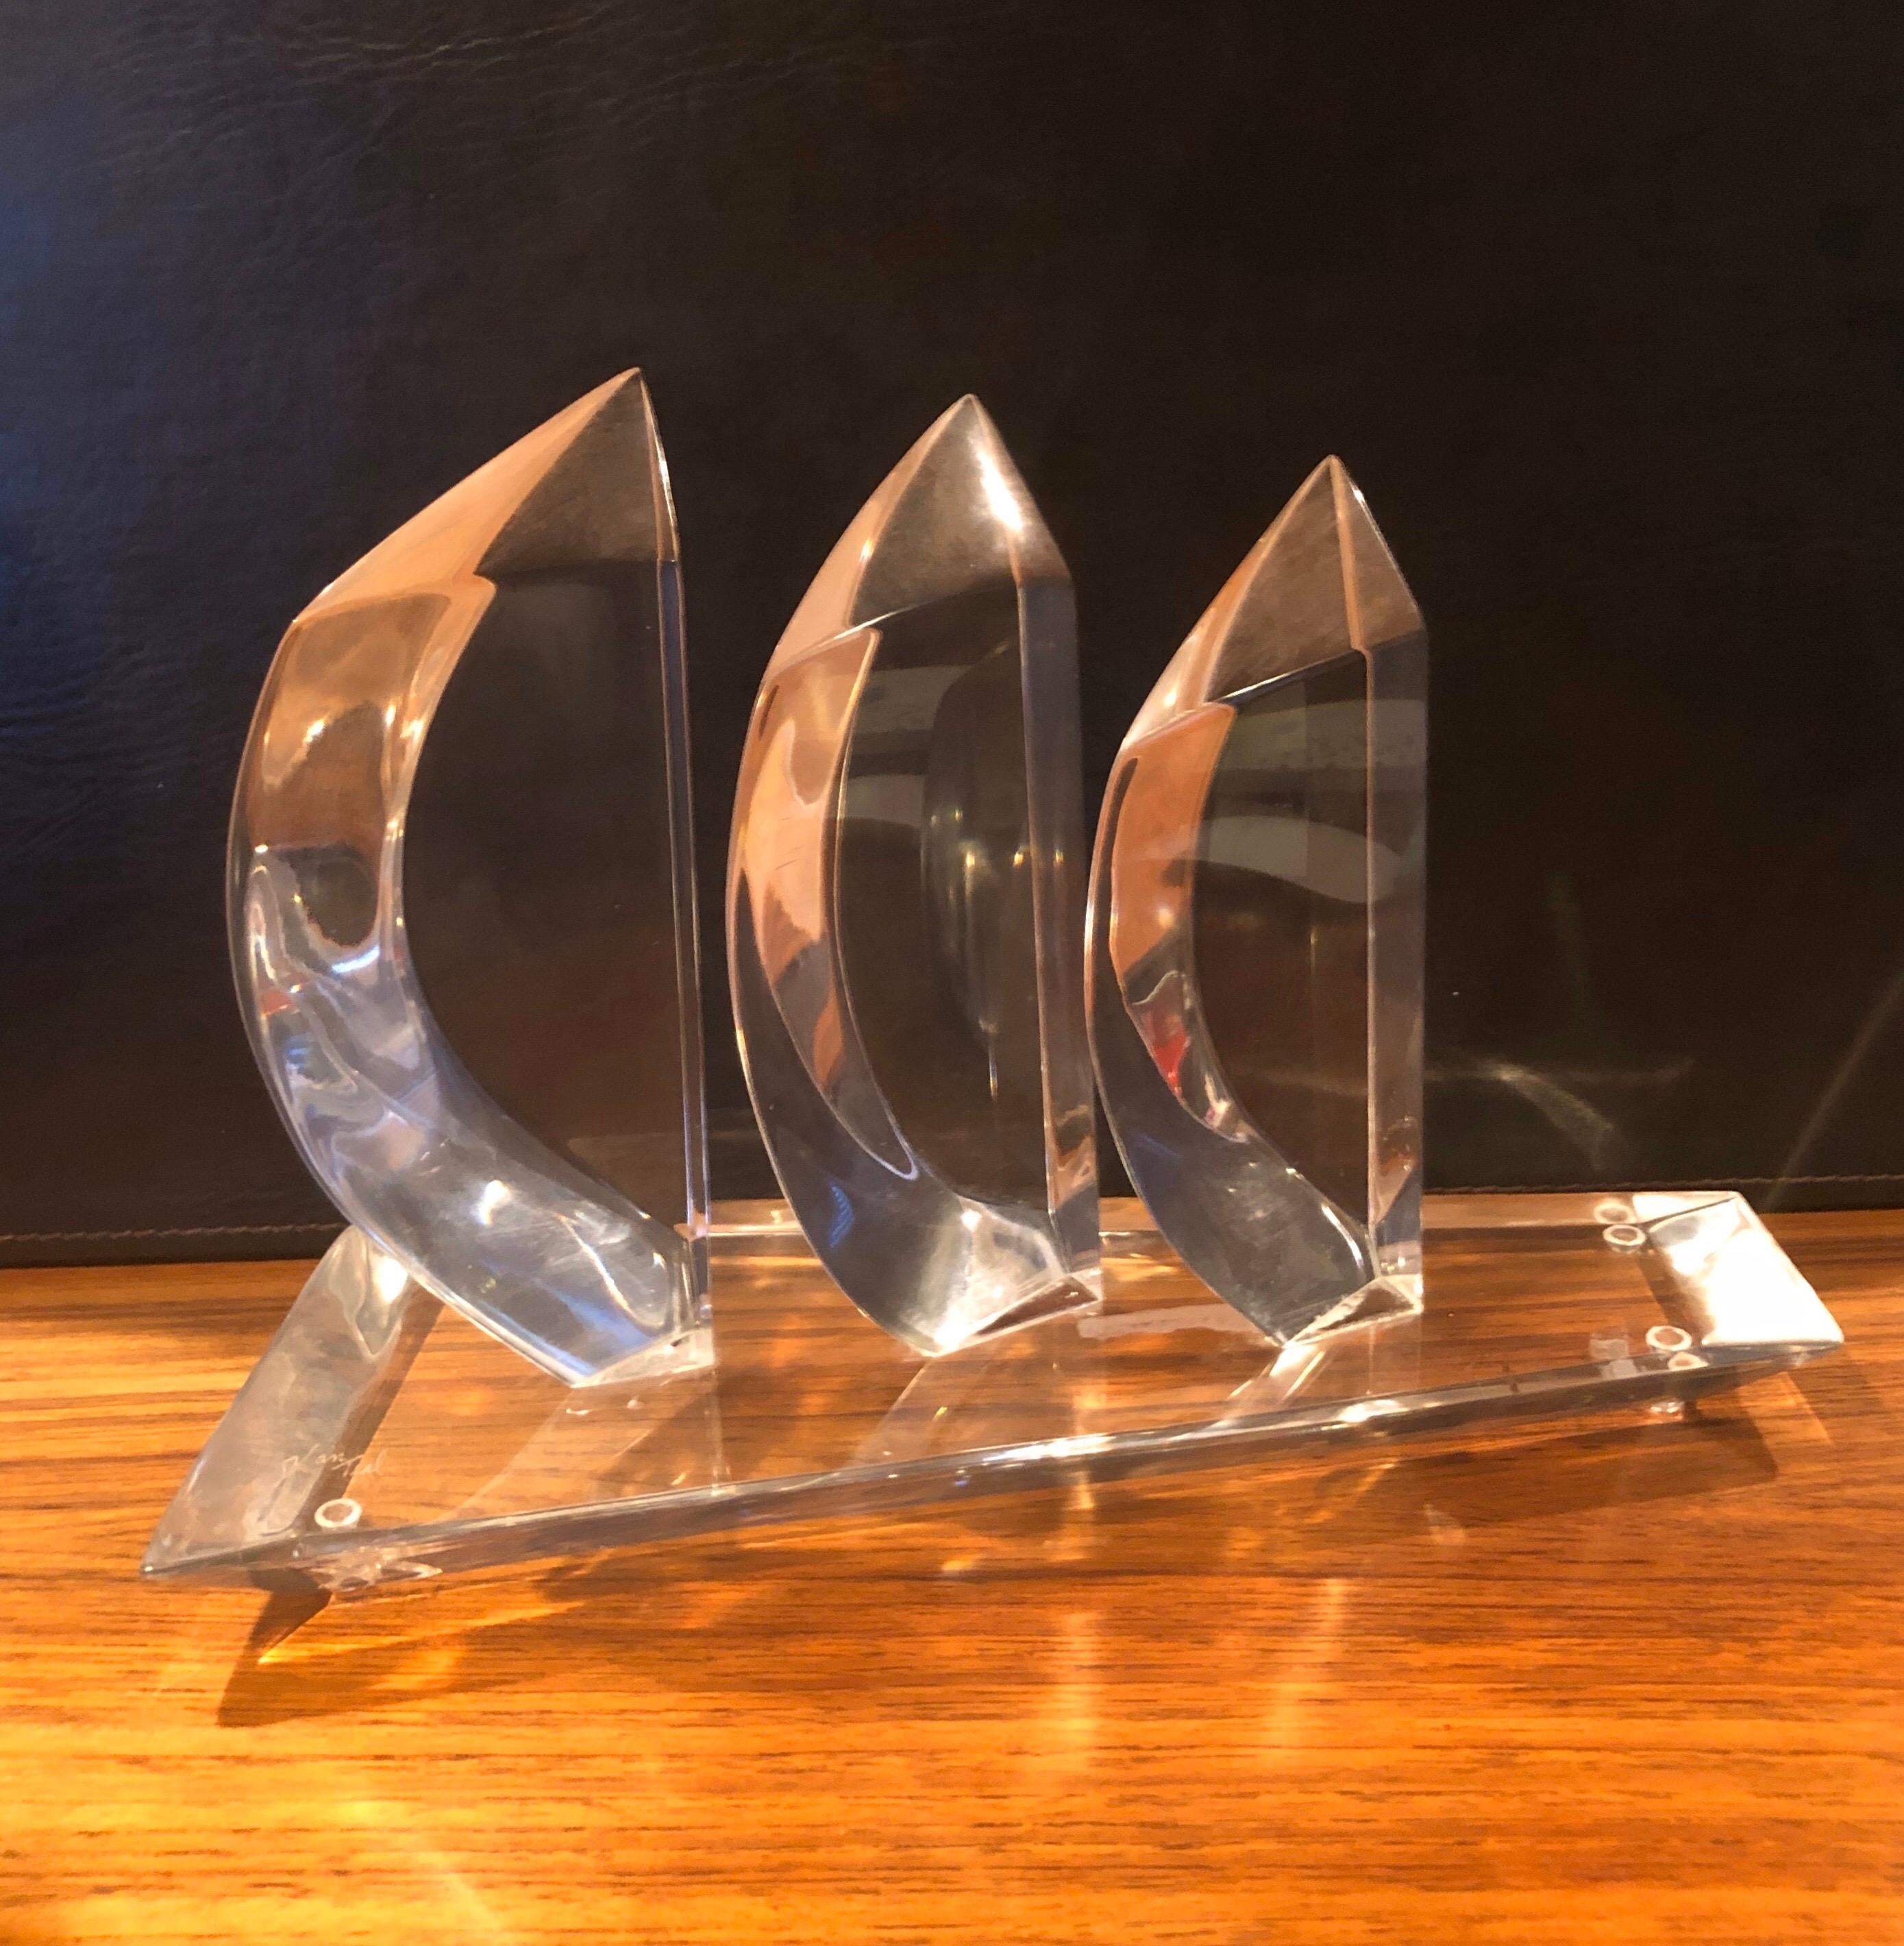 Lucite sailboat sculpture by Hivo Van Teal, circa 1960s. This beautiful sculpture of three sailboats in the wind is in great condition with no chips, cracks or crazing. There is a small hazy spot between two of the sails that is in the Lucite,